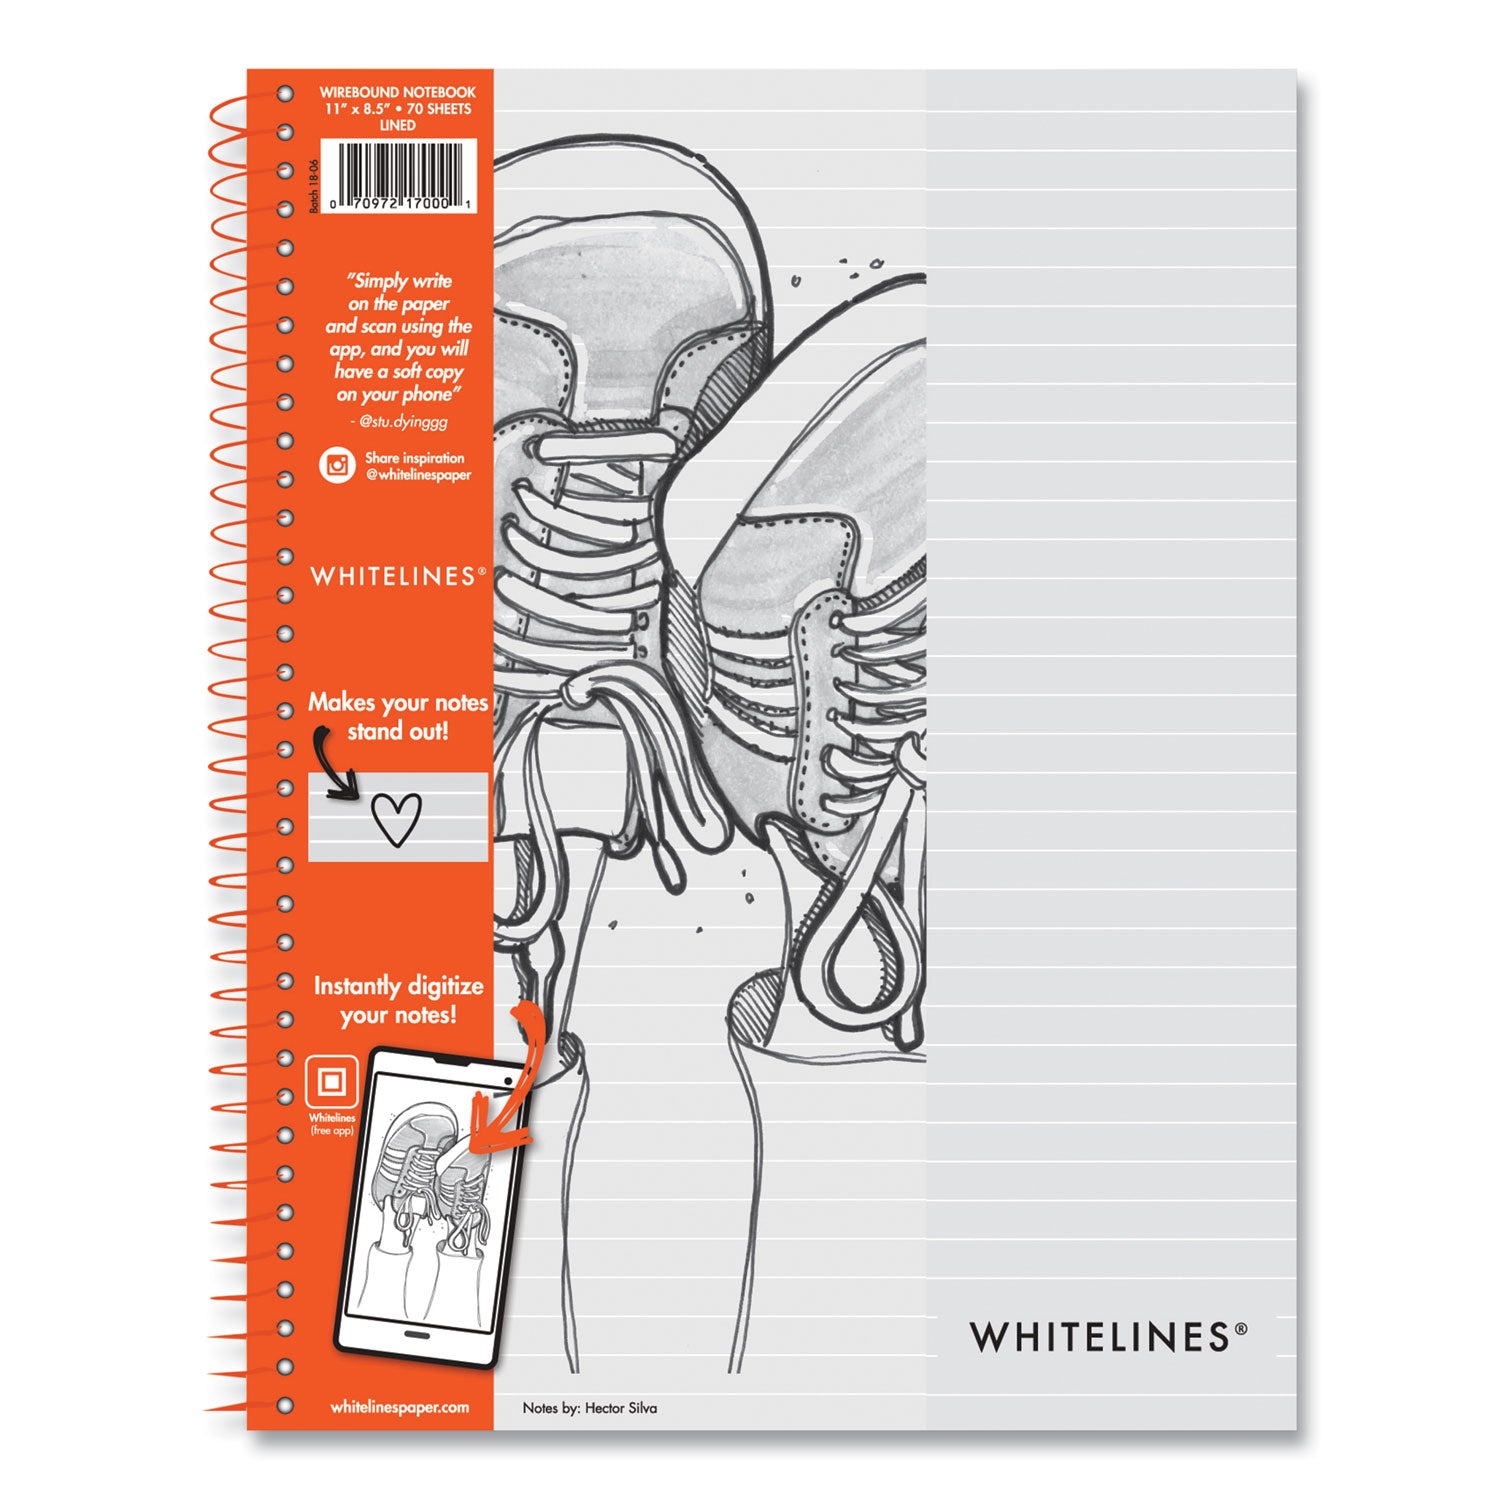 whitelines-notebook-medium-college-rule-gray-orange-cover-70-85-x-11-sheets-12-carton-ships-in-4-6-business-days_roa17000cs - 2